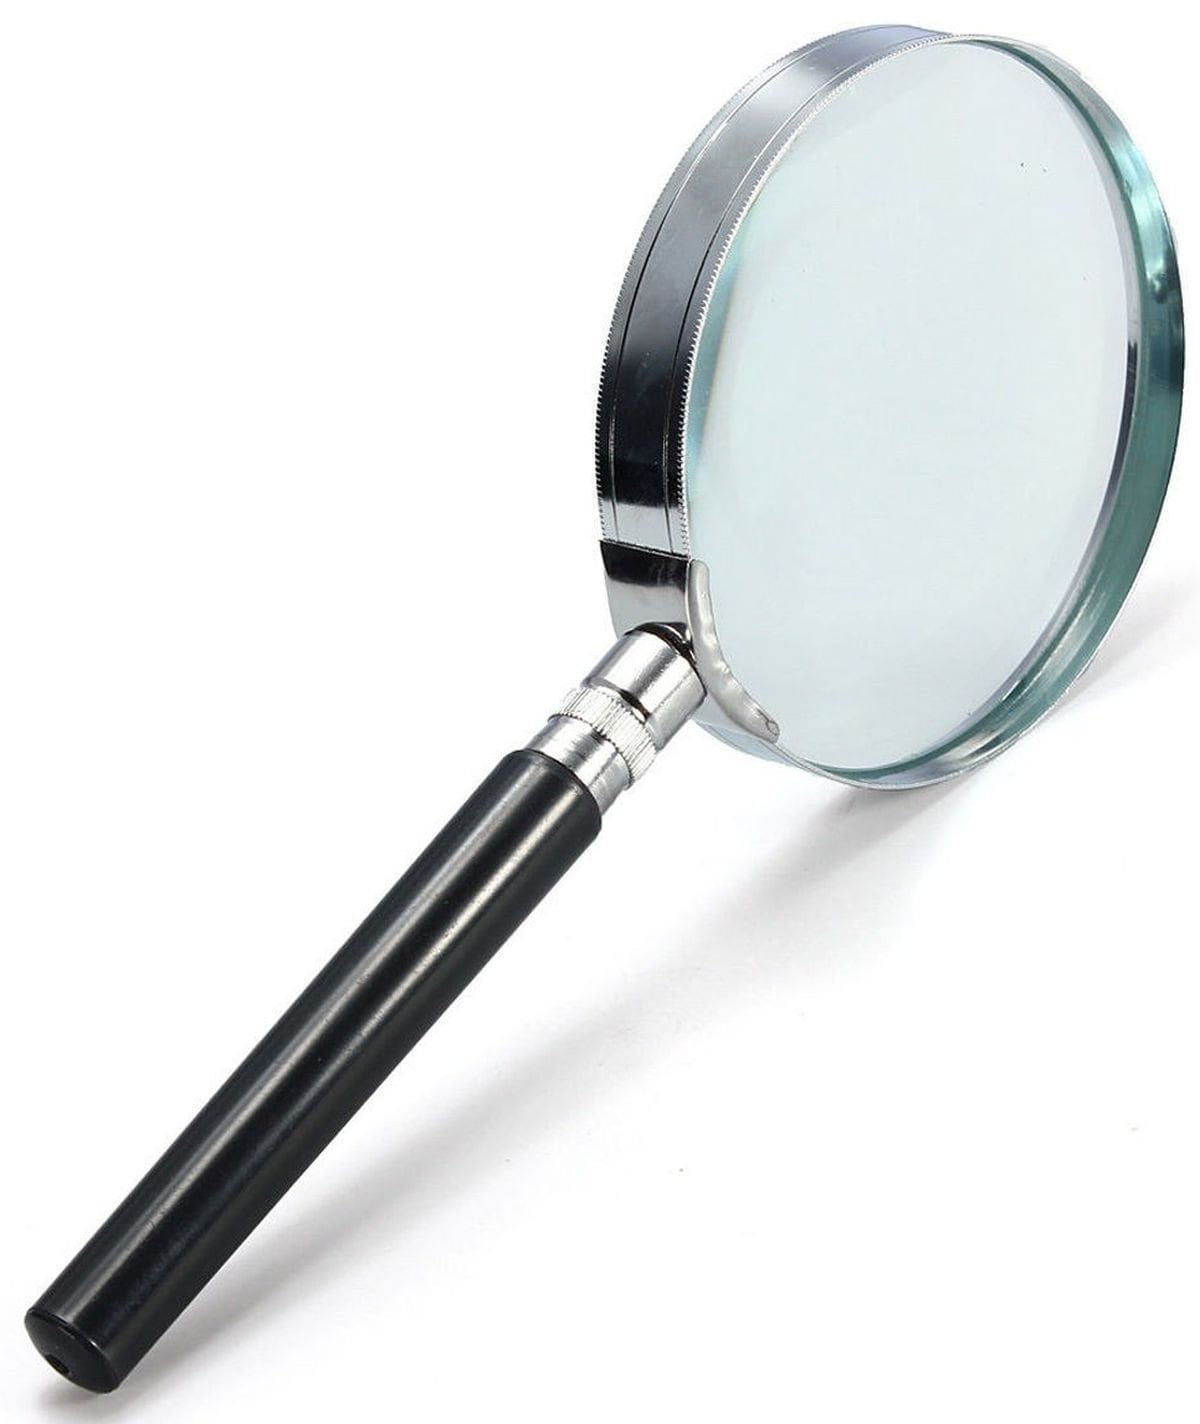 Download free photo of Magnifier,tool,enlarge,lens,glass - from